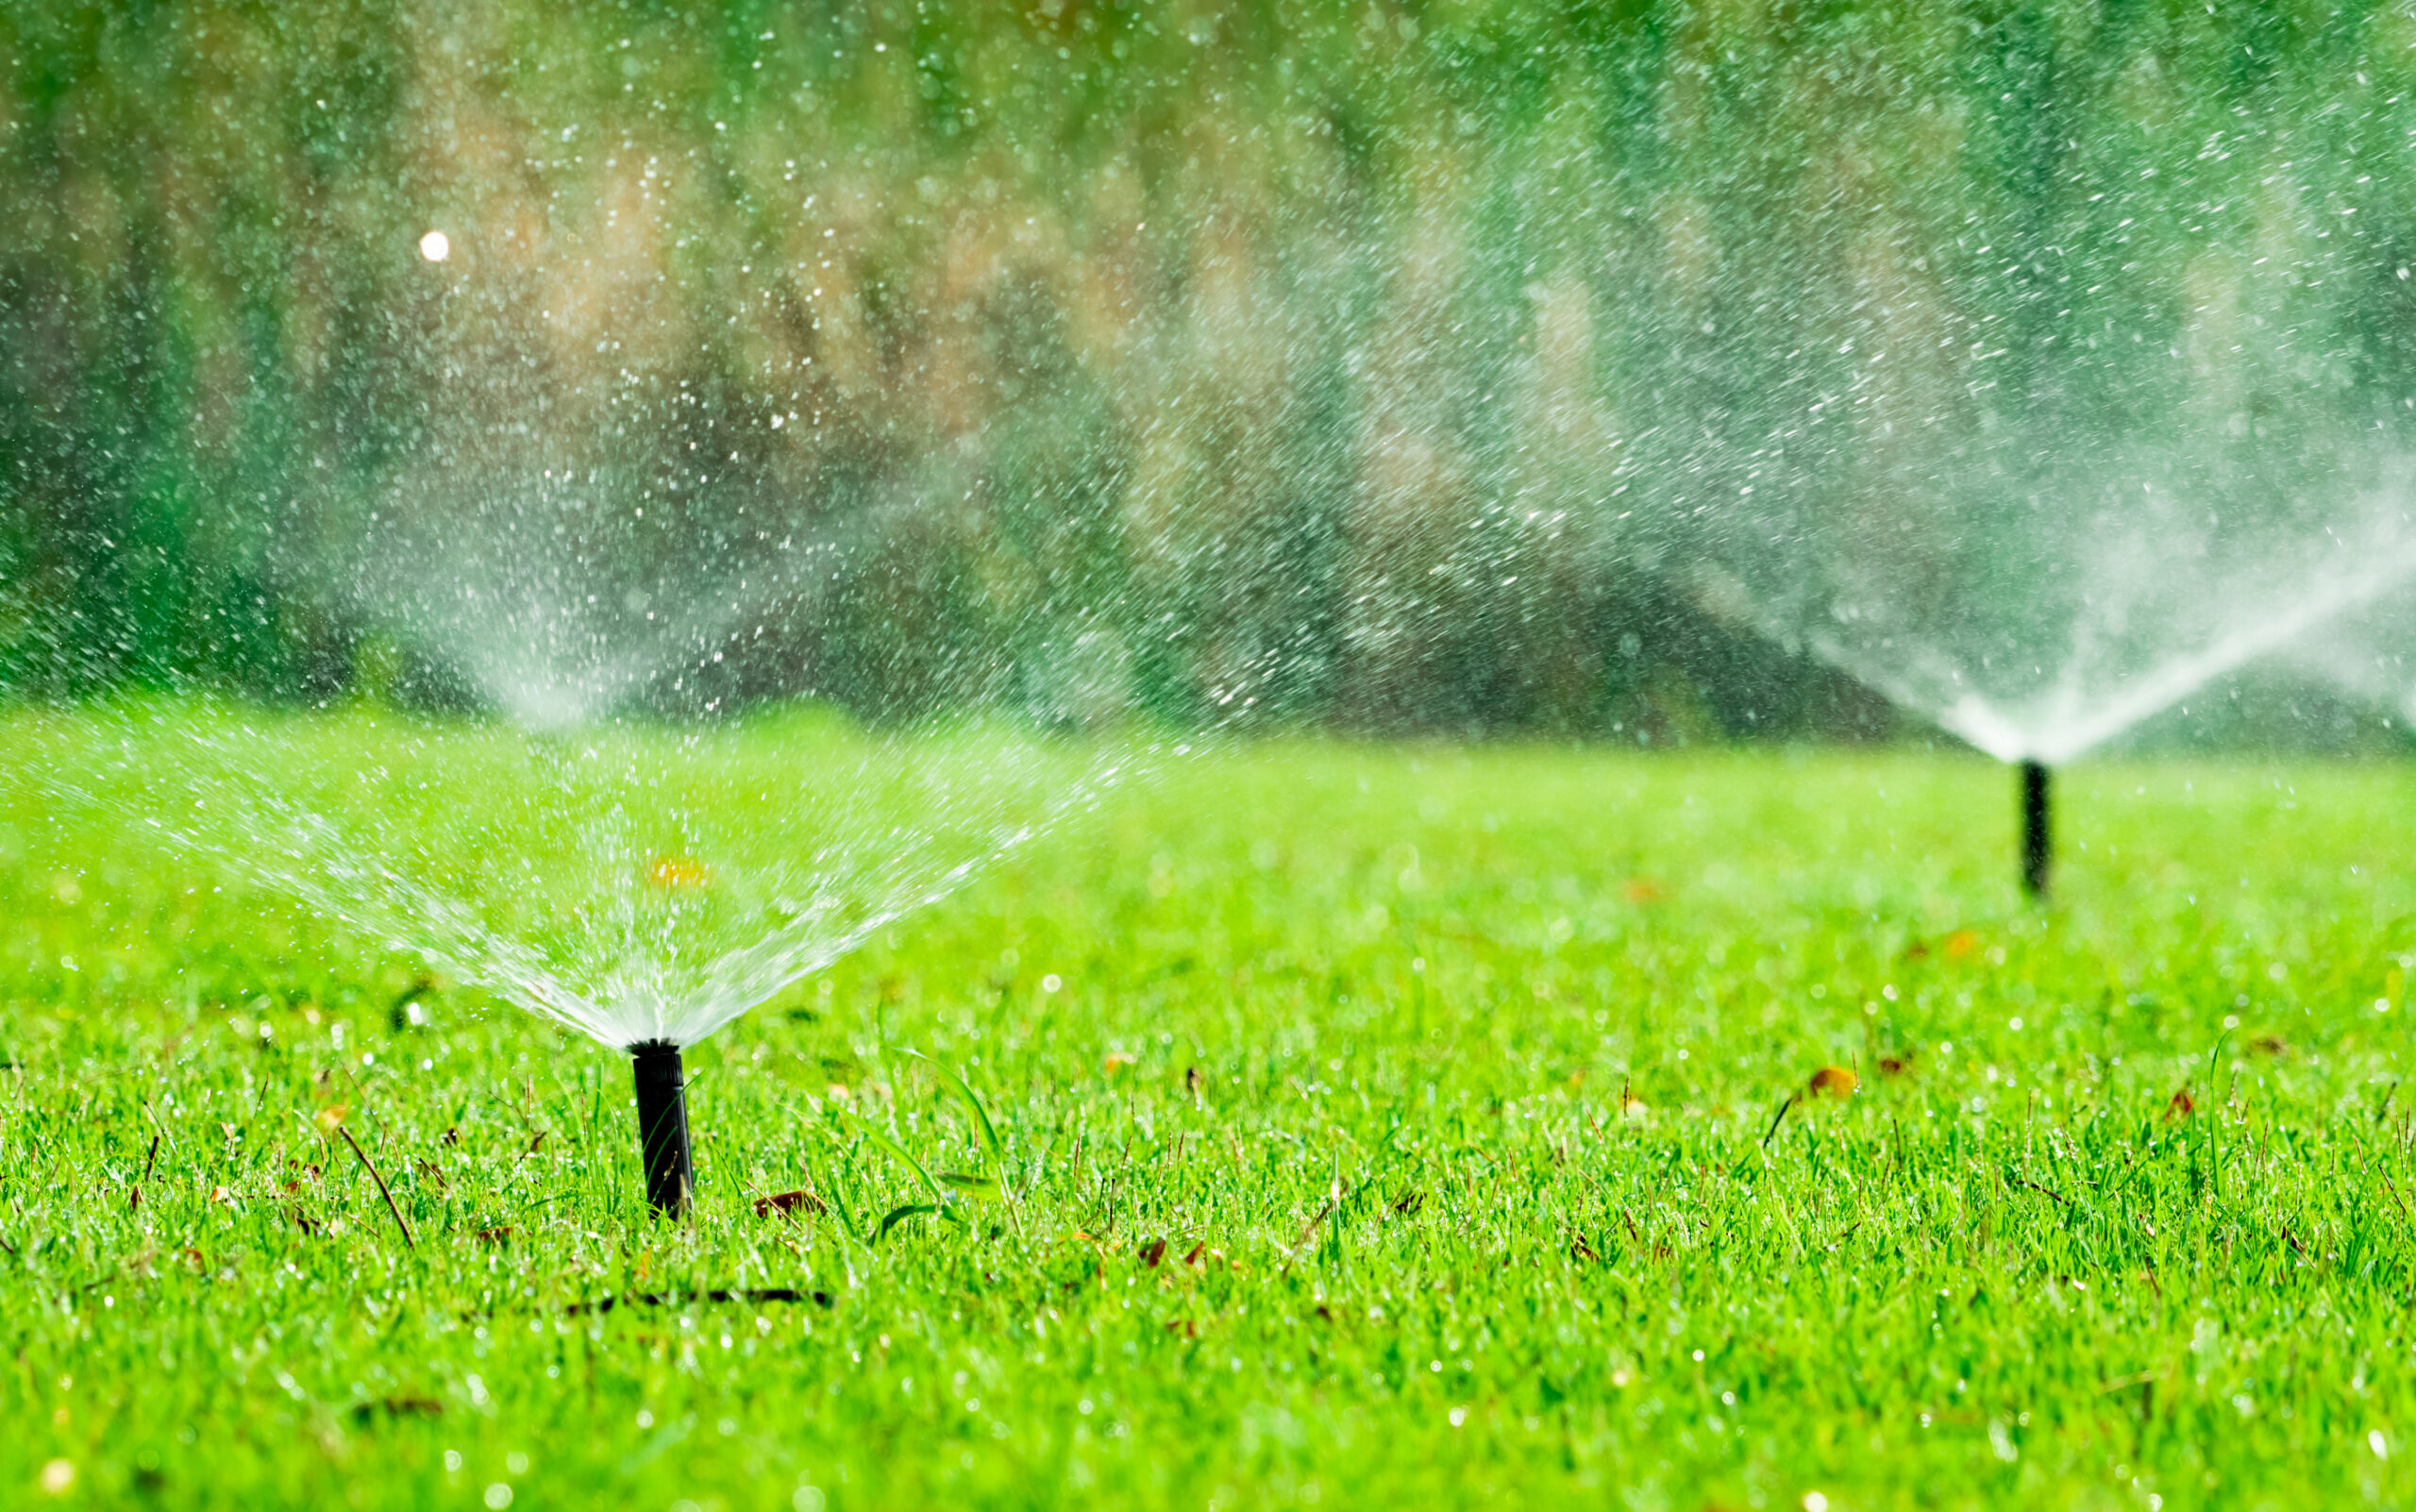 Water saving or water conservation from sprinkler system with smart sensors